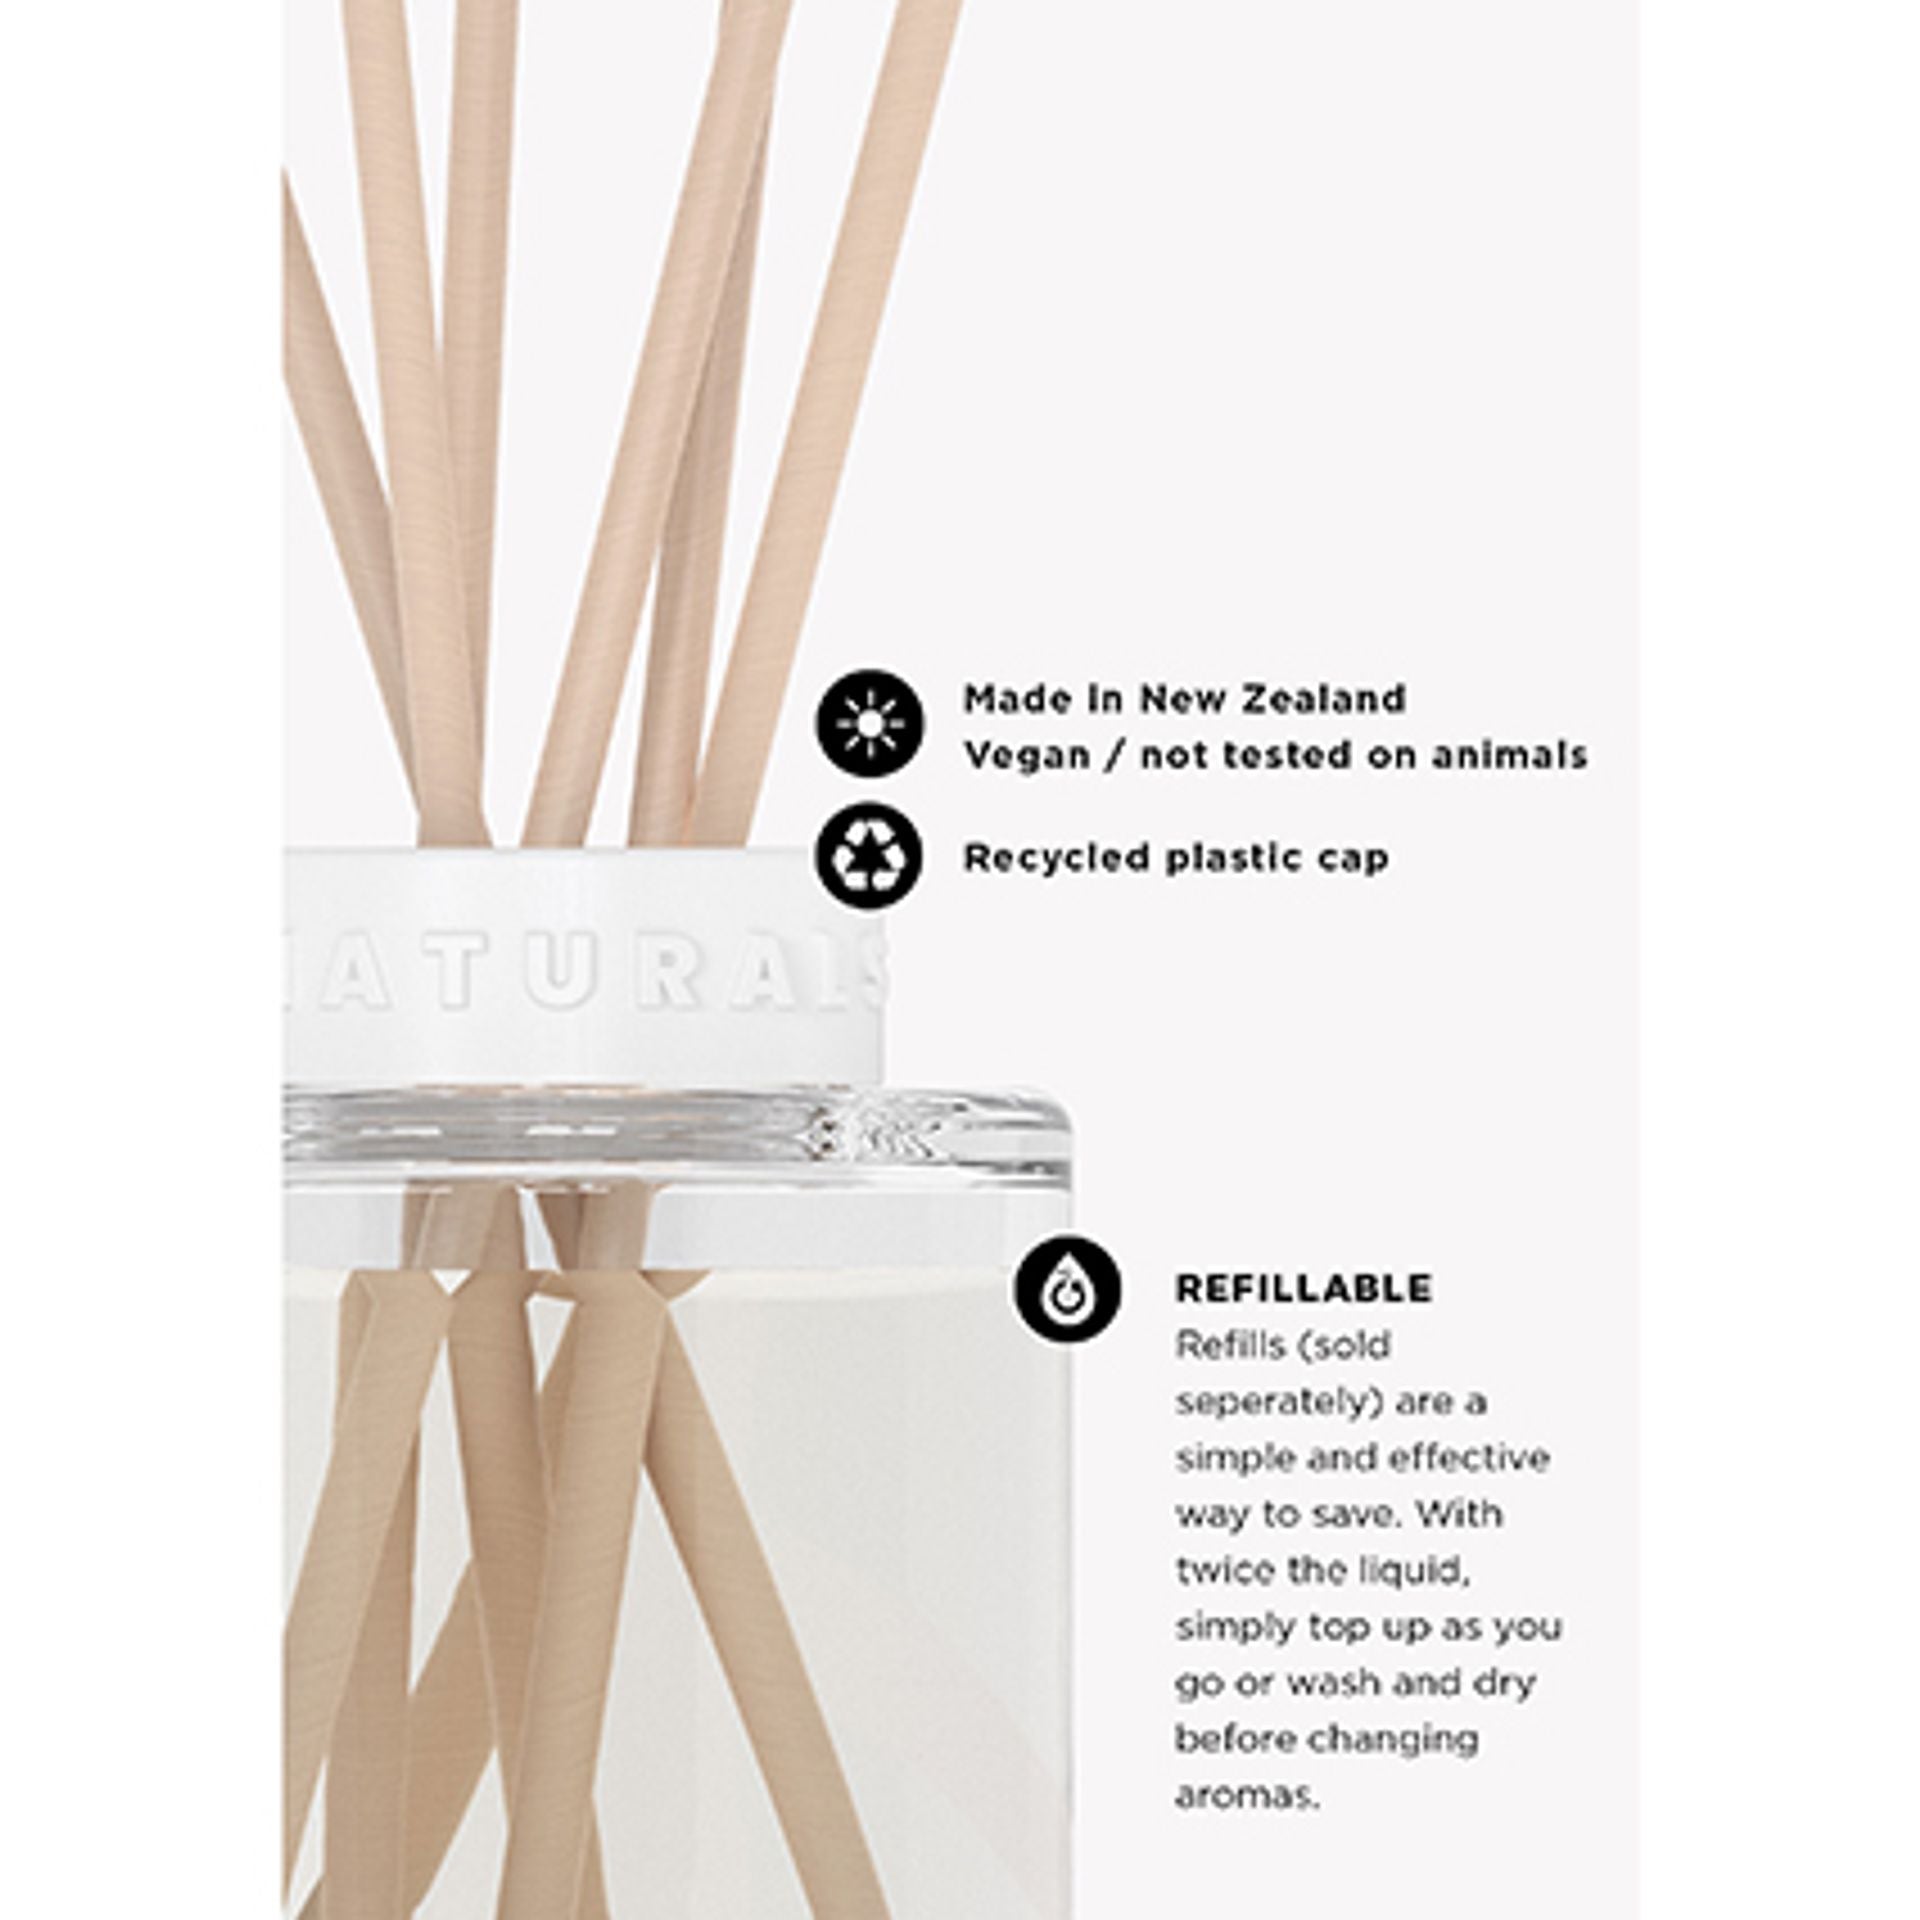 The Aromatherapy Co Naturals Coconut & Passion Berry Diffuser